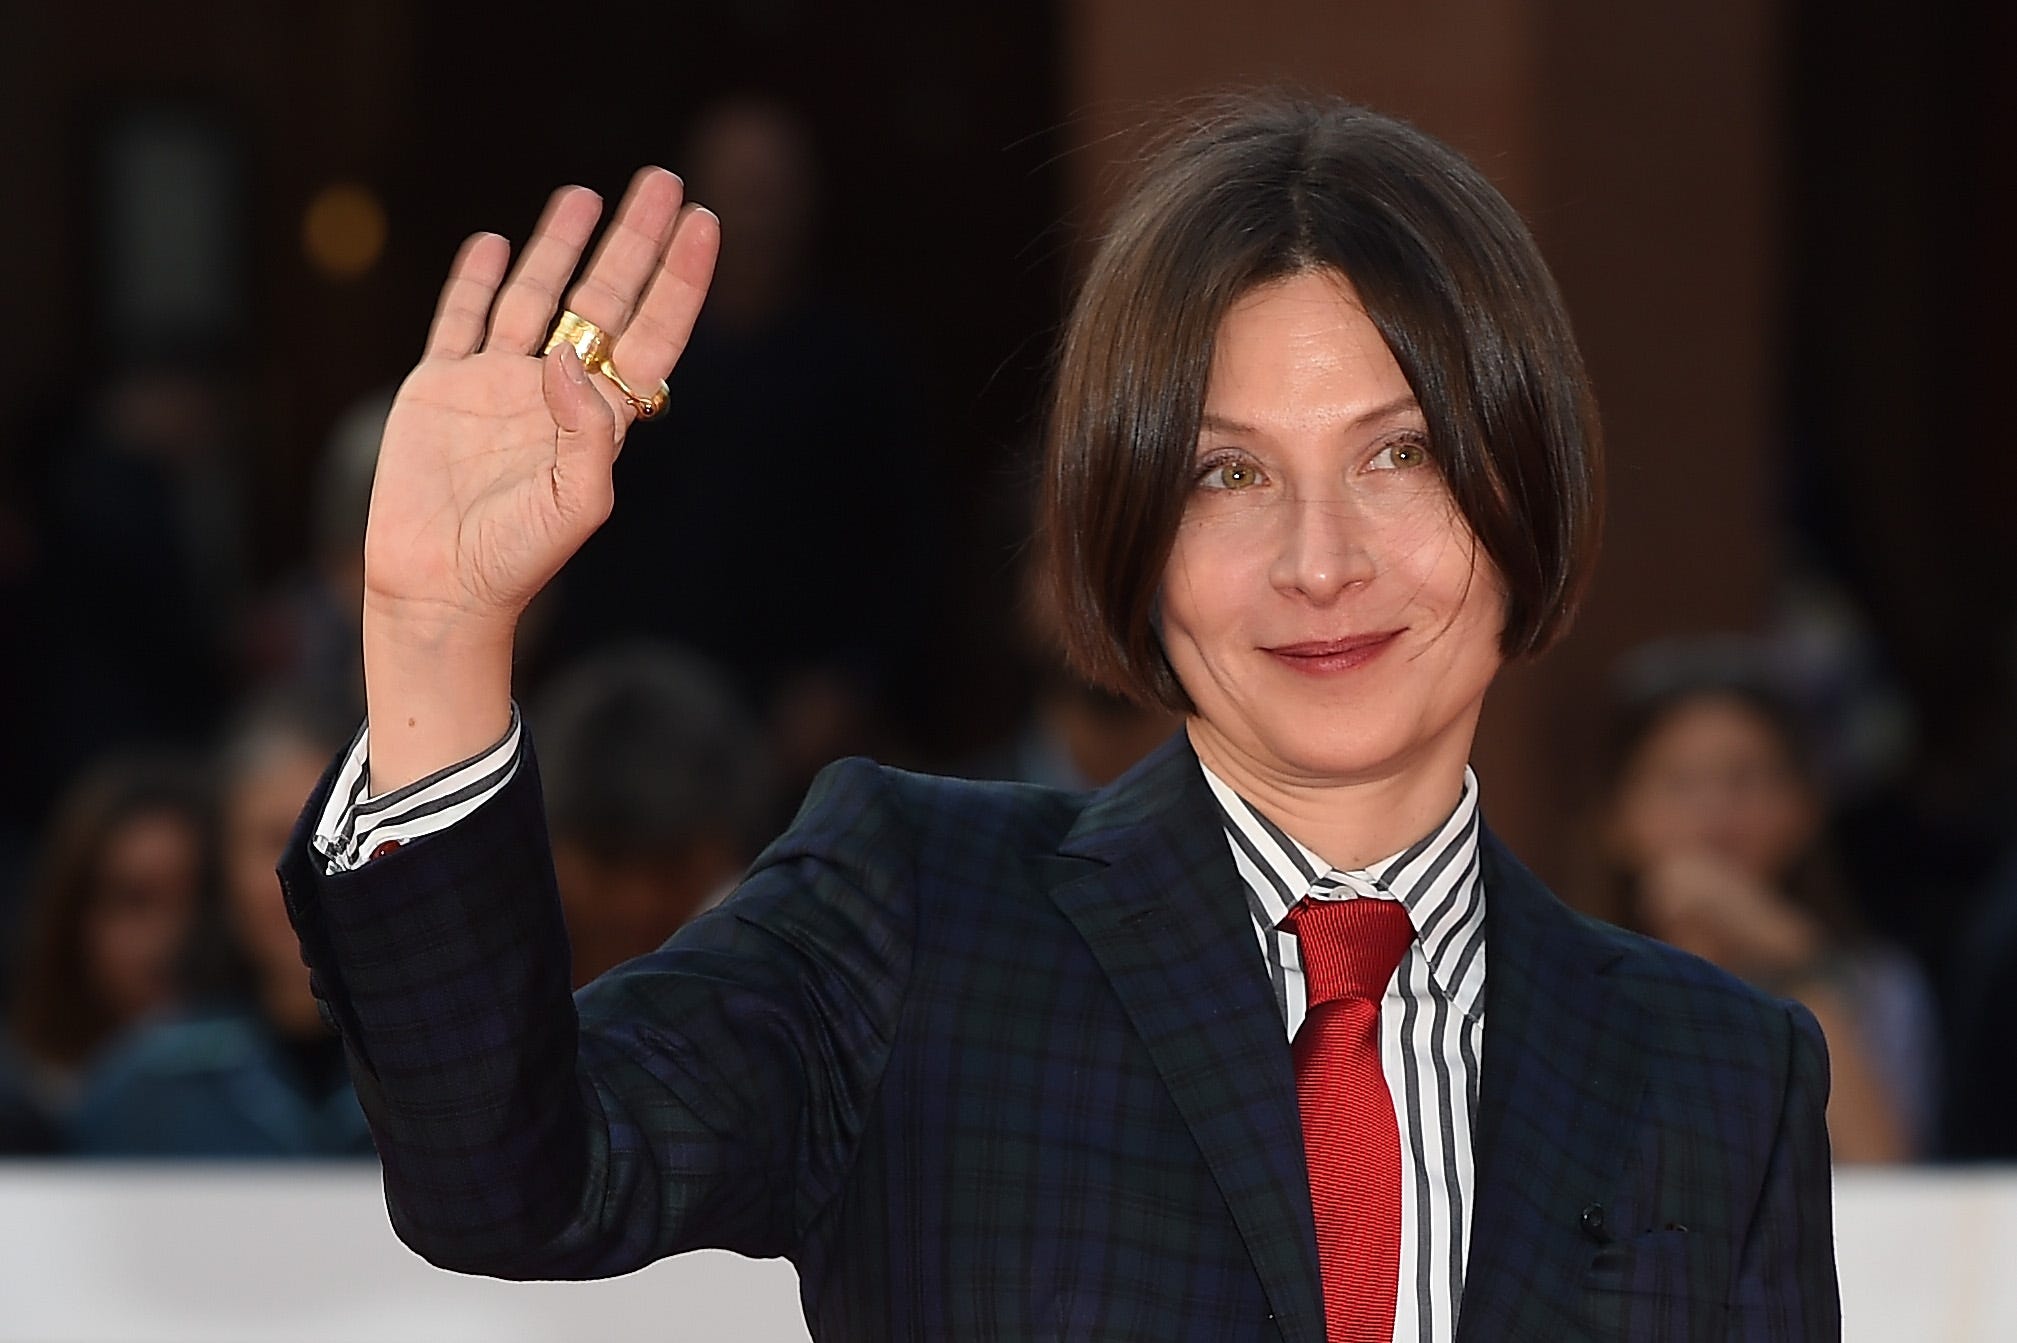 Donna Tartt: I've tried to write faster and I don't really enjoy